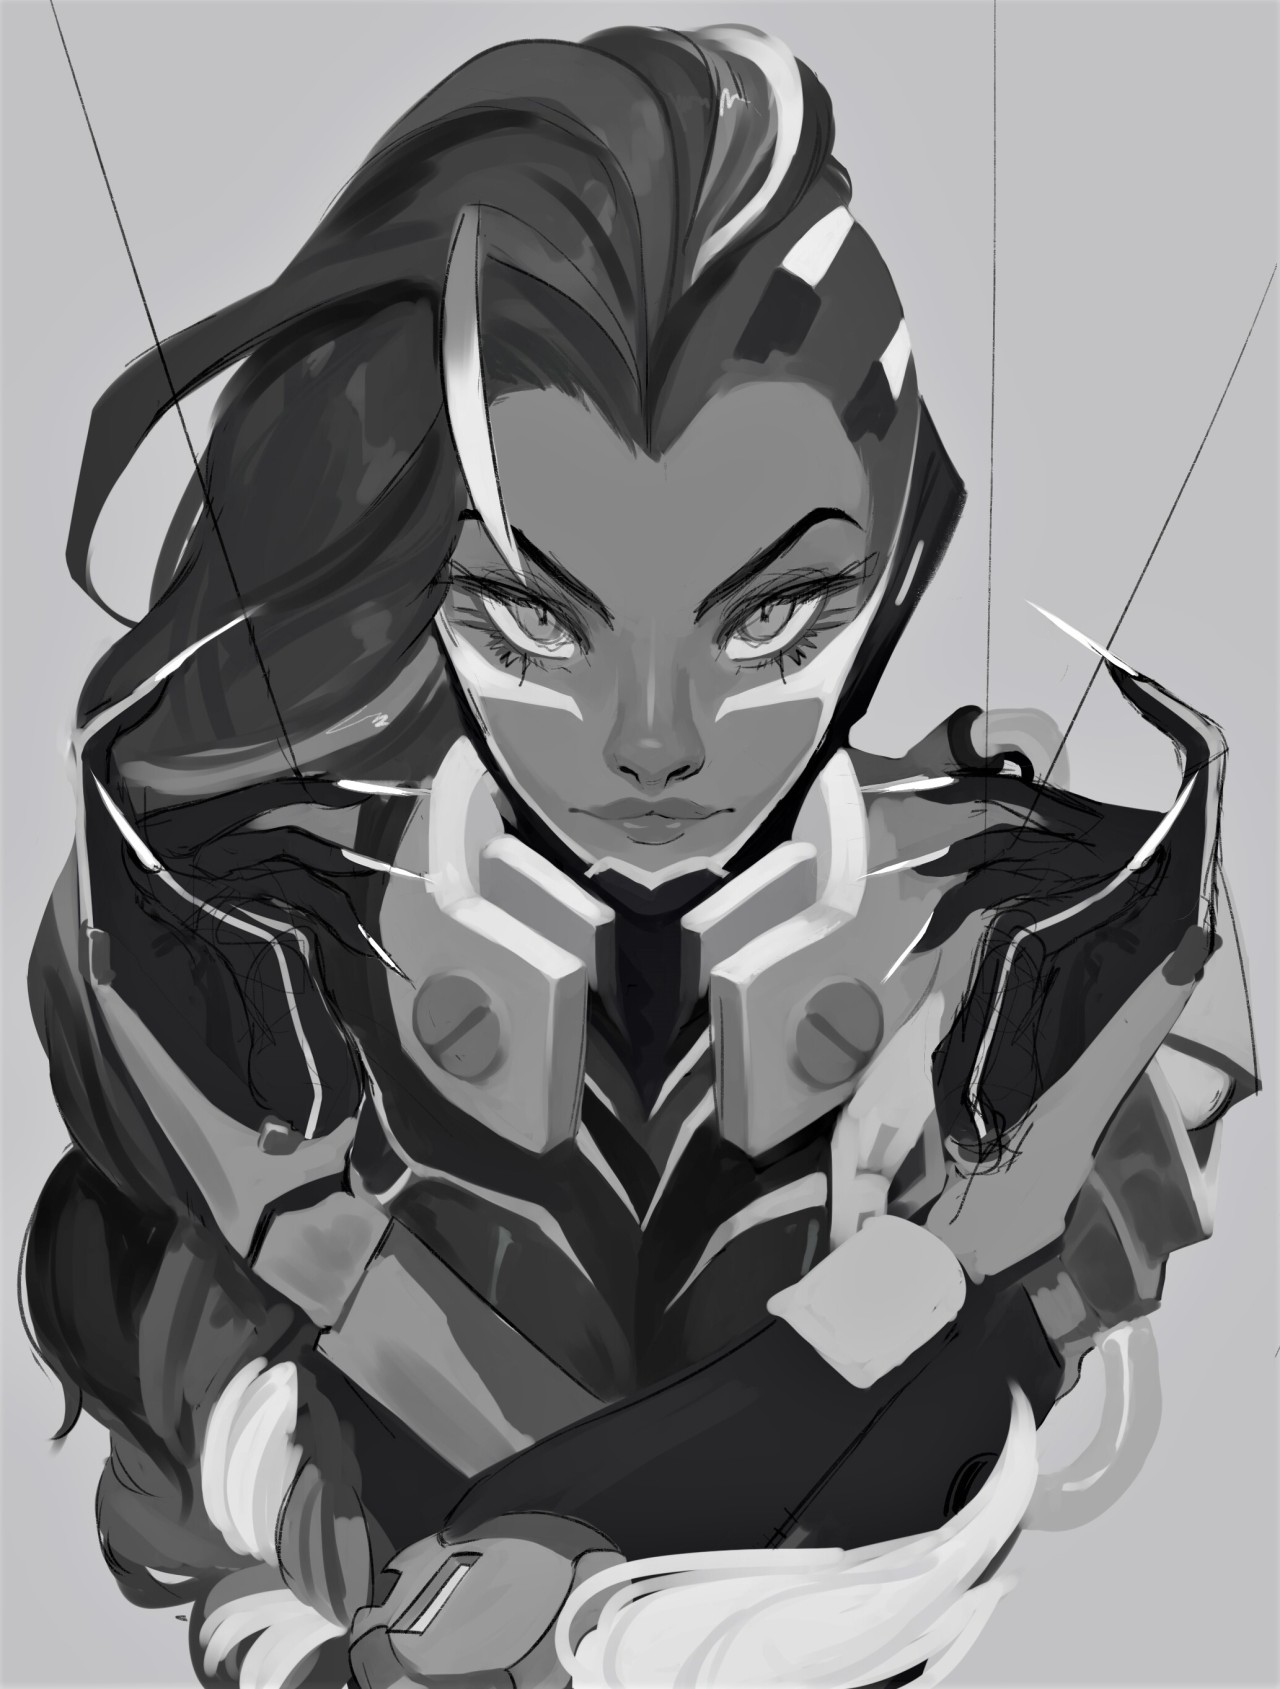 dragonaer123: Sombra’s legendary skin is awesome but i can’t draw mech right